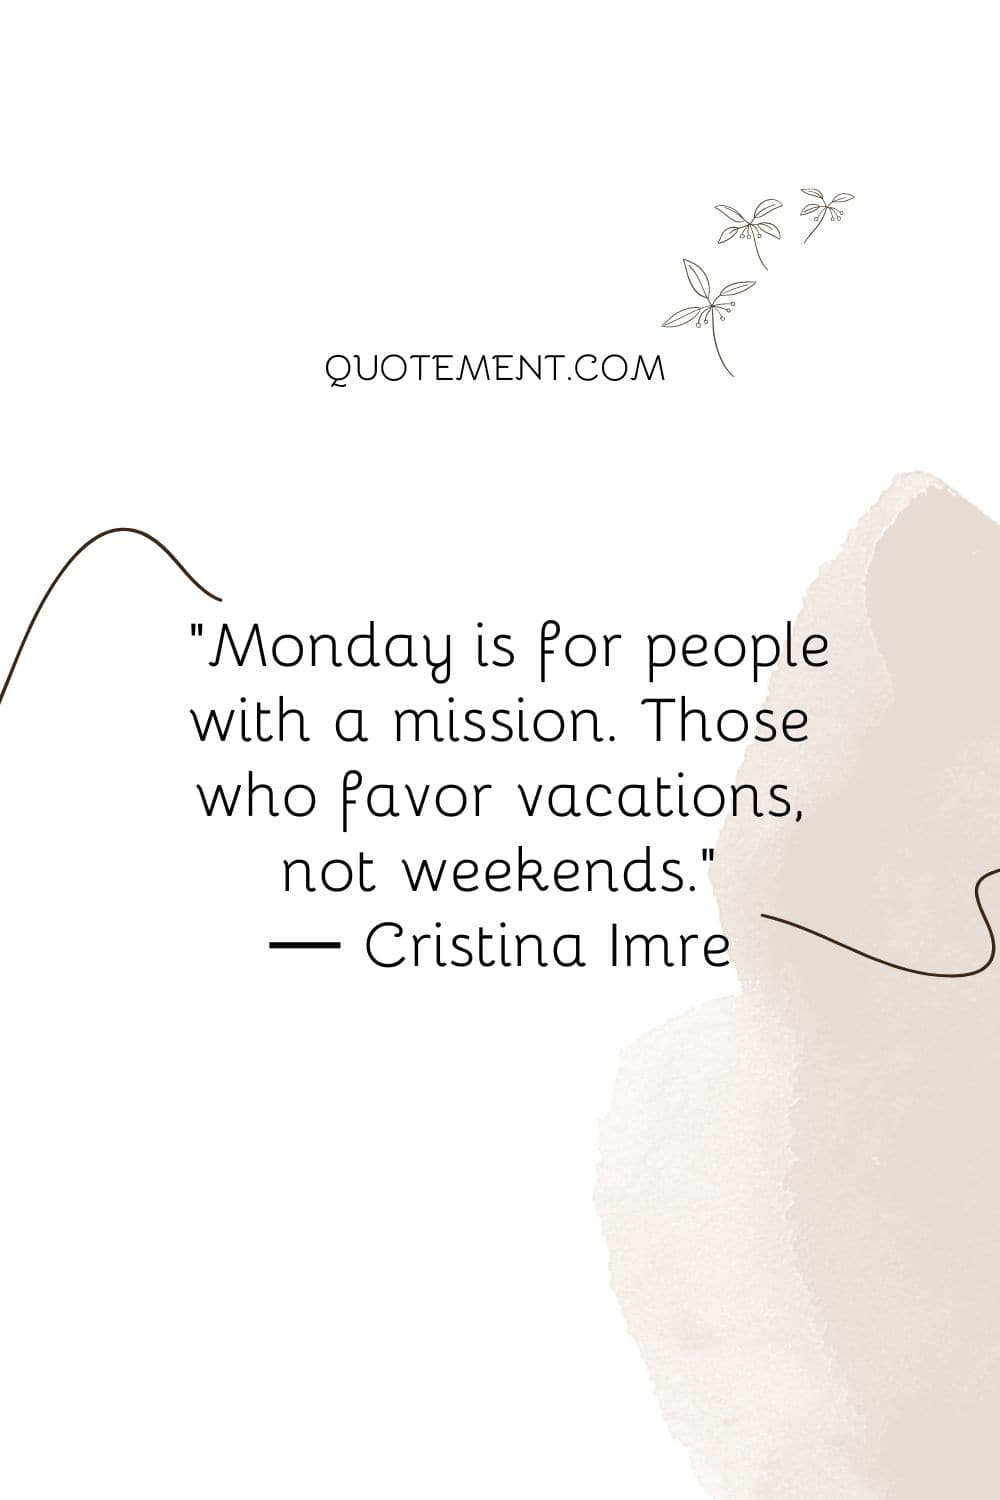 Monday is for people with a mission. Those who favor vacations, not weekends